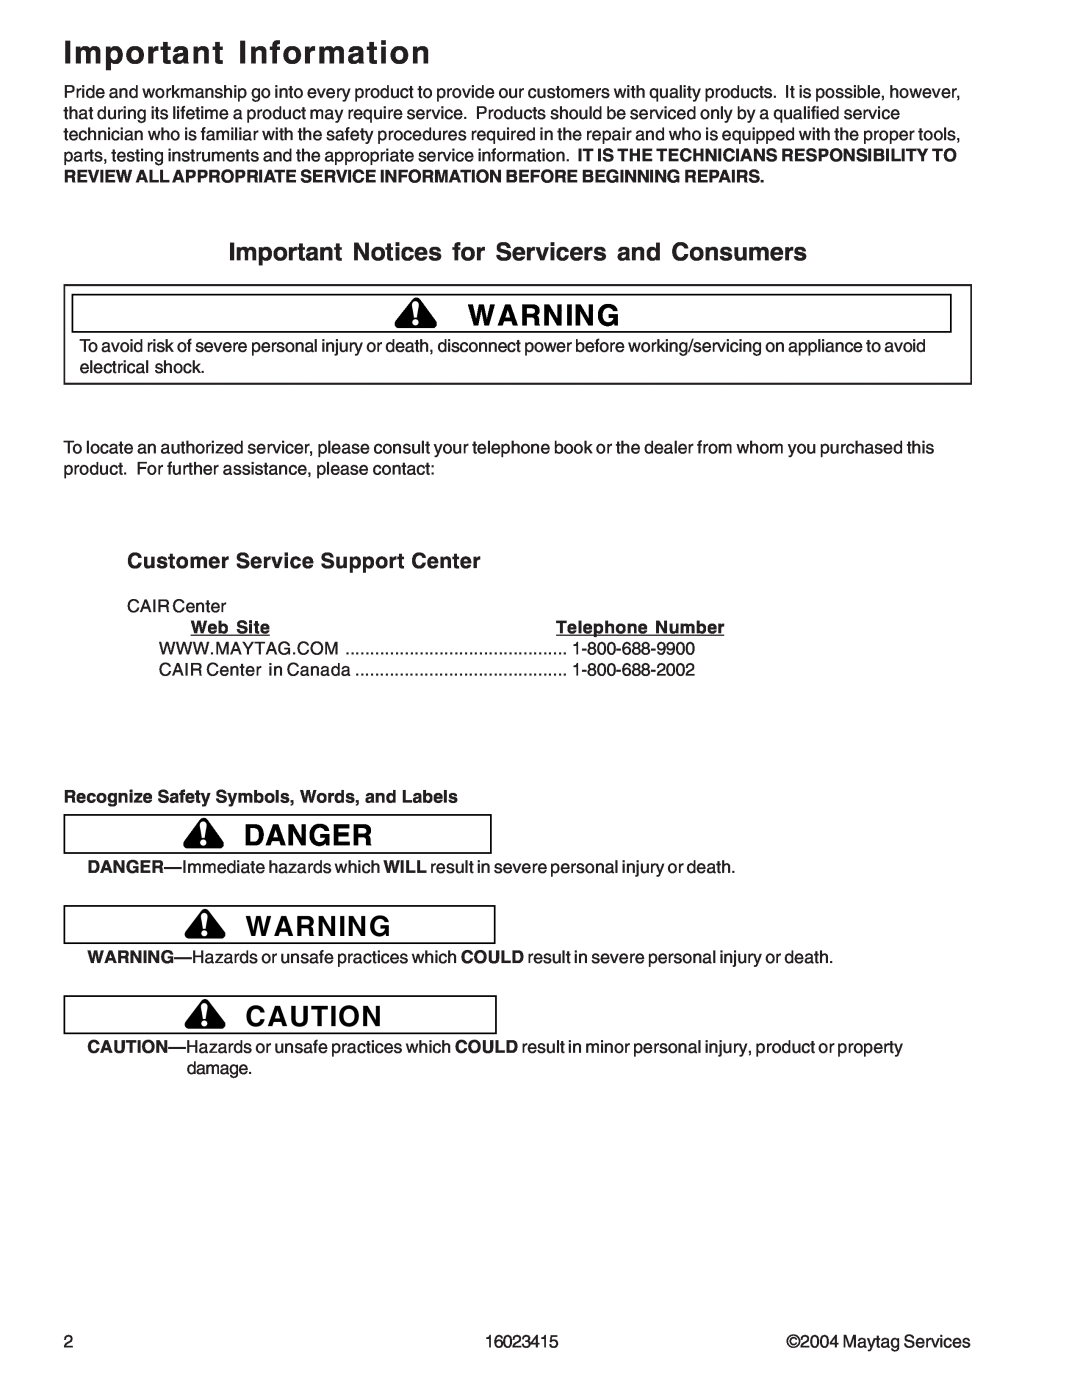 Maytag MGR6875ADB/Q/S/W manual Important Information, Important Notices for Servicers and Consumers, Danger, Web Site 